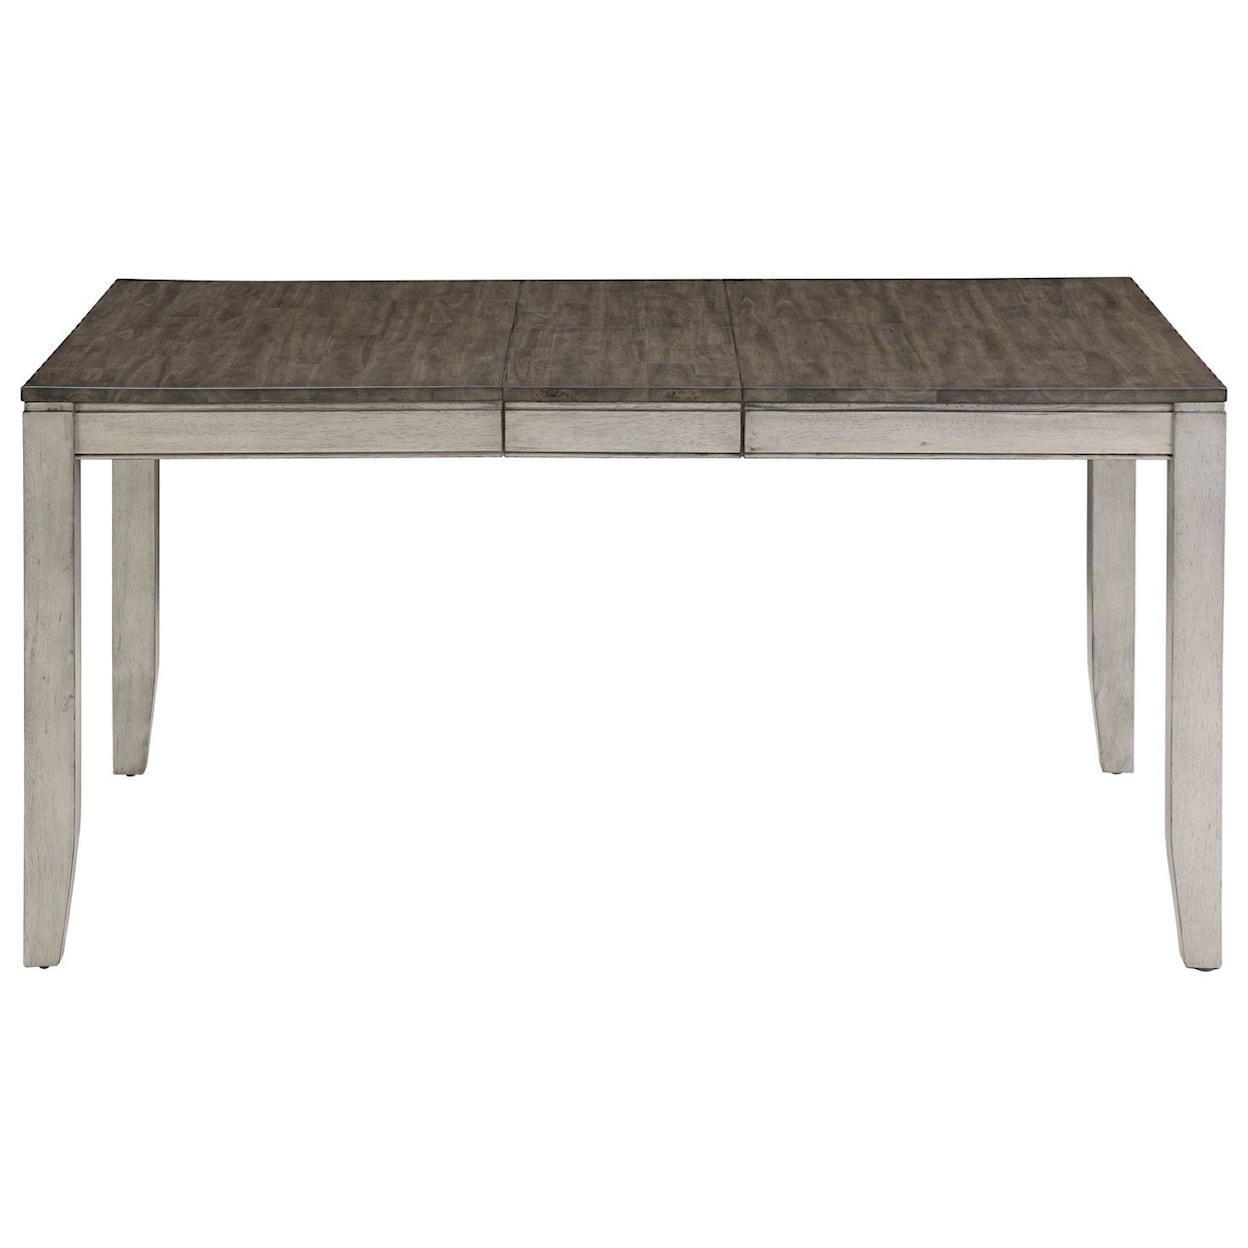 Steve Silver Abacus Dining Table